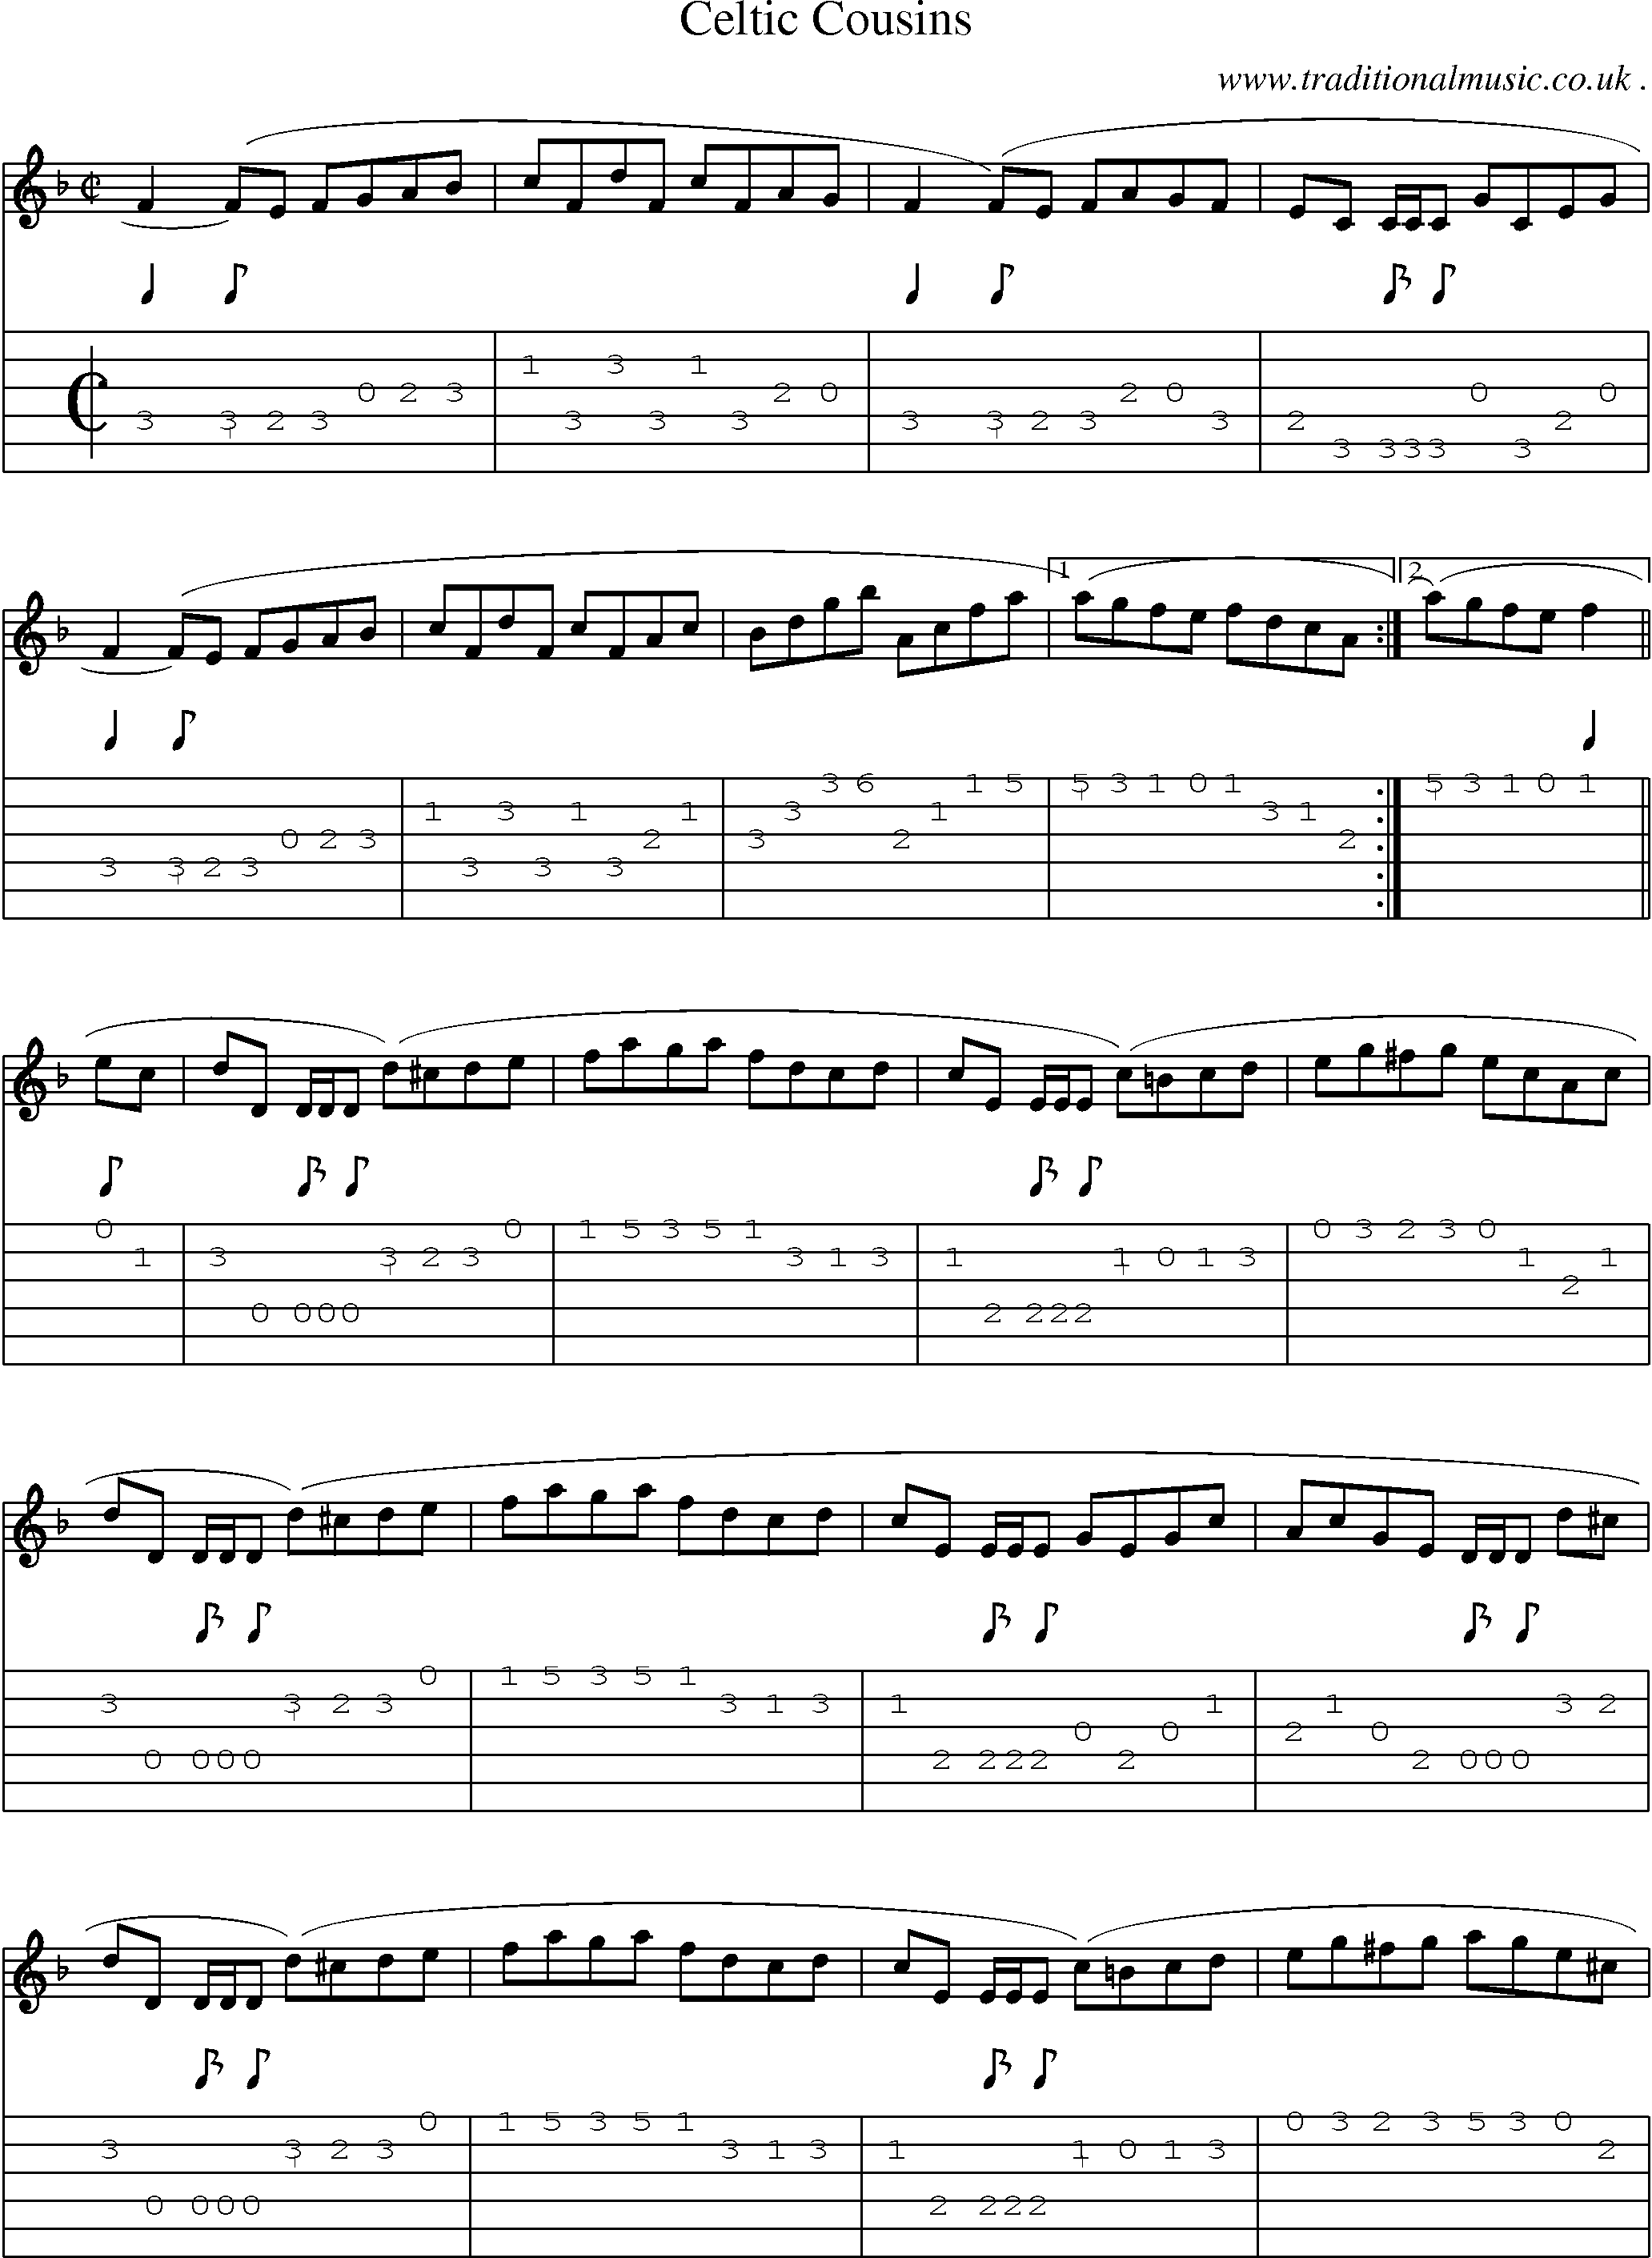 Sheet-Music and Guitar Tabs for Celtic Cousins